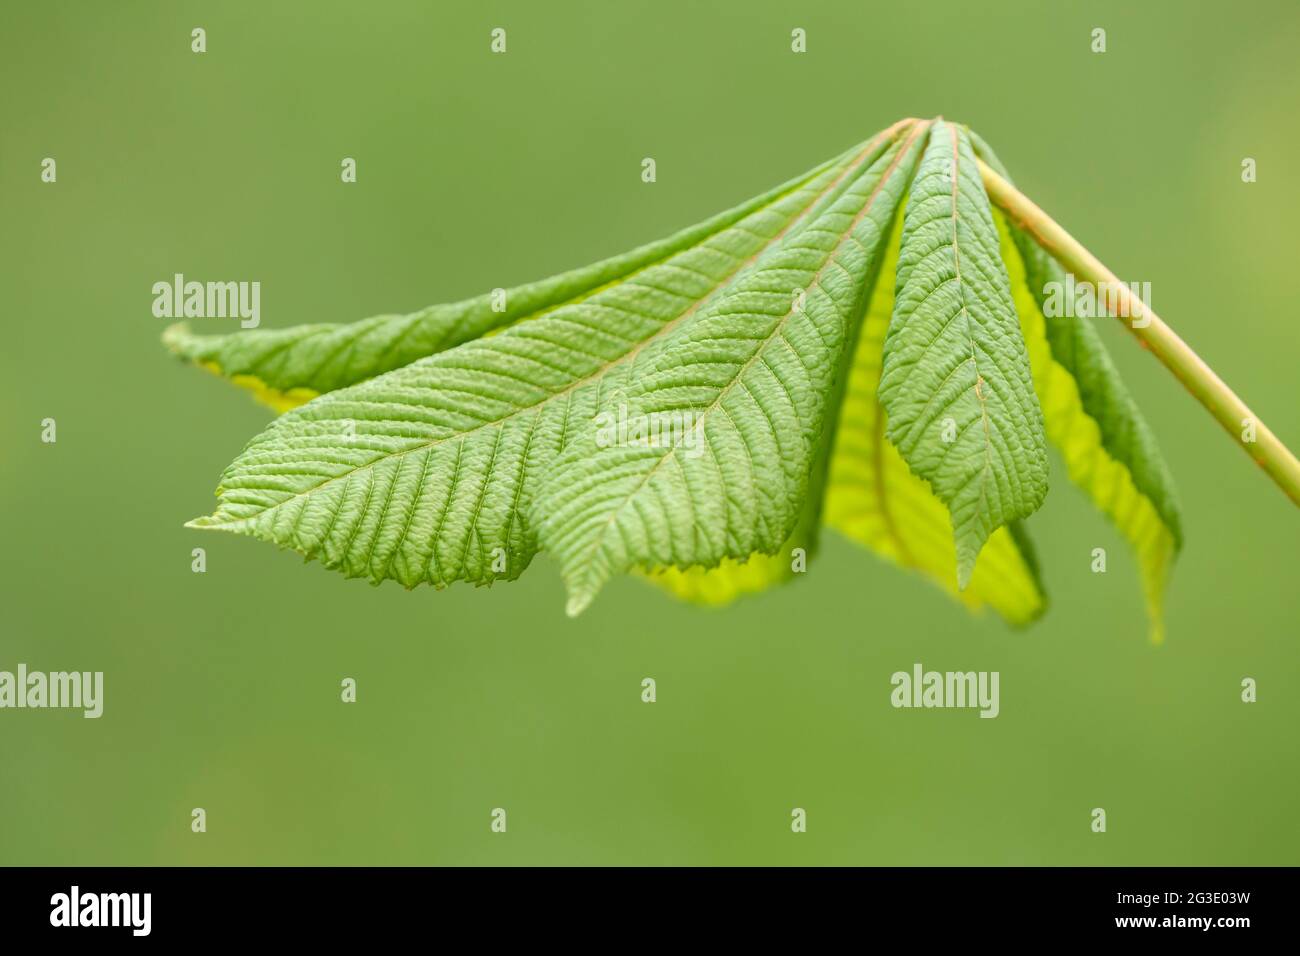 Young fresh leaf of the horse chestnut (Aesculus hippocastanum) on solid green background Stock Photo